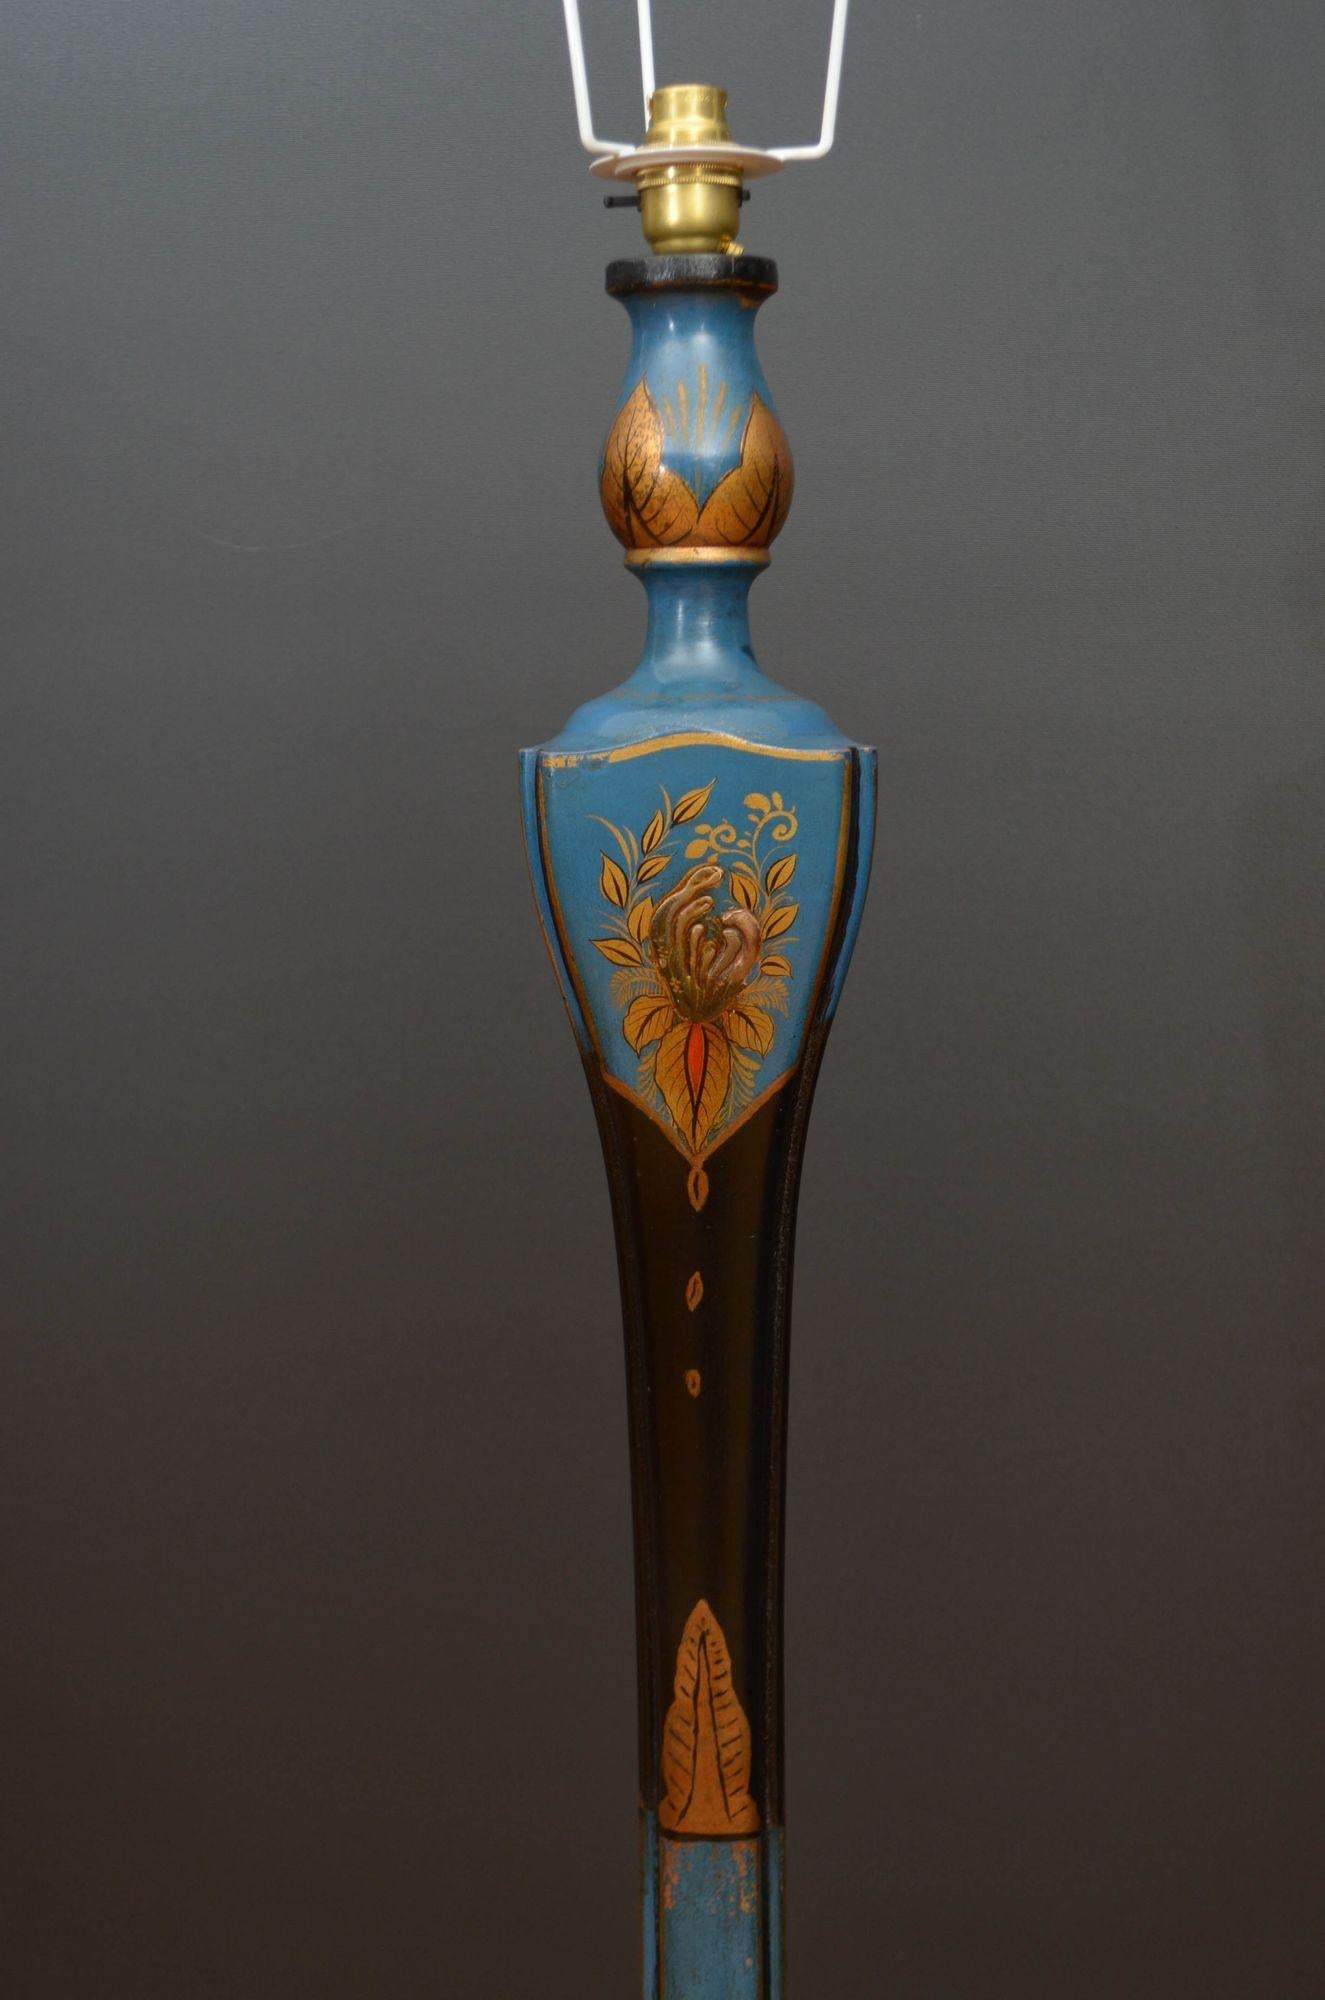 St049 An early 20th century turned wood and lacquered Chinoiserie decorated standard lamp in dark blue with decoratively turned upright and a dished base that is raised on three flat bun feet.
The lamp has been recently re-wired and tested, the